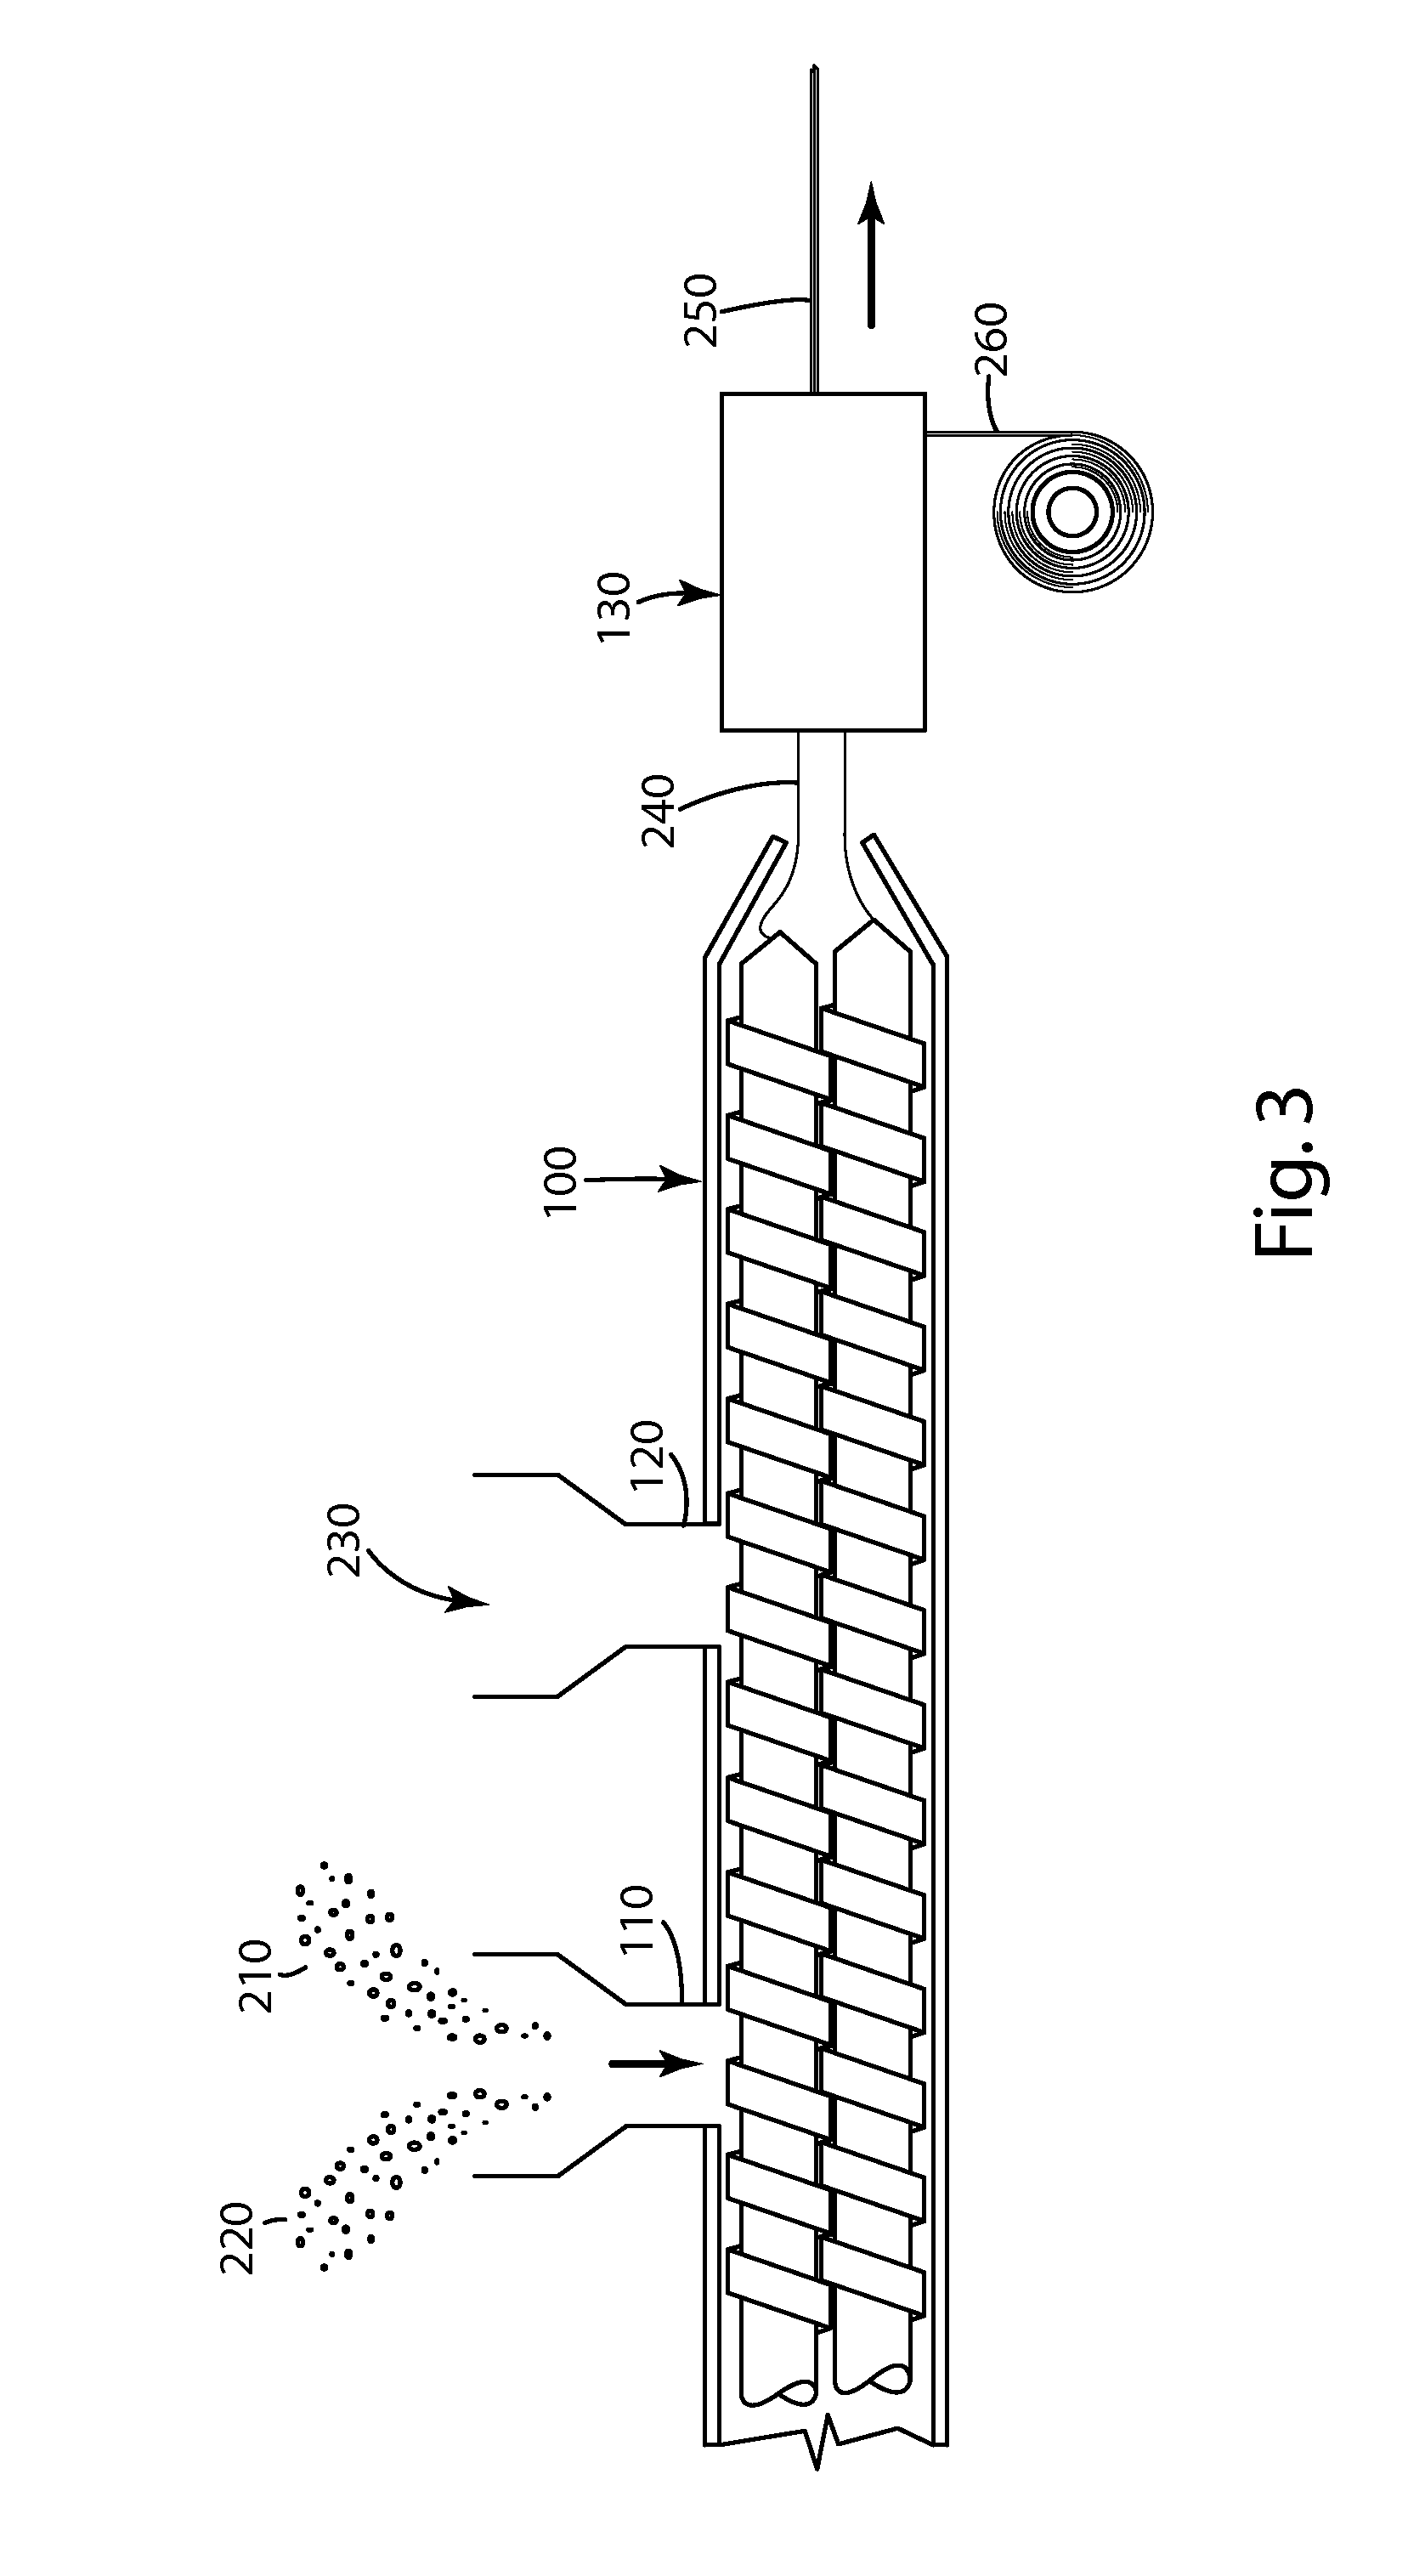 Oral care layer and related method of manufacture